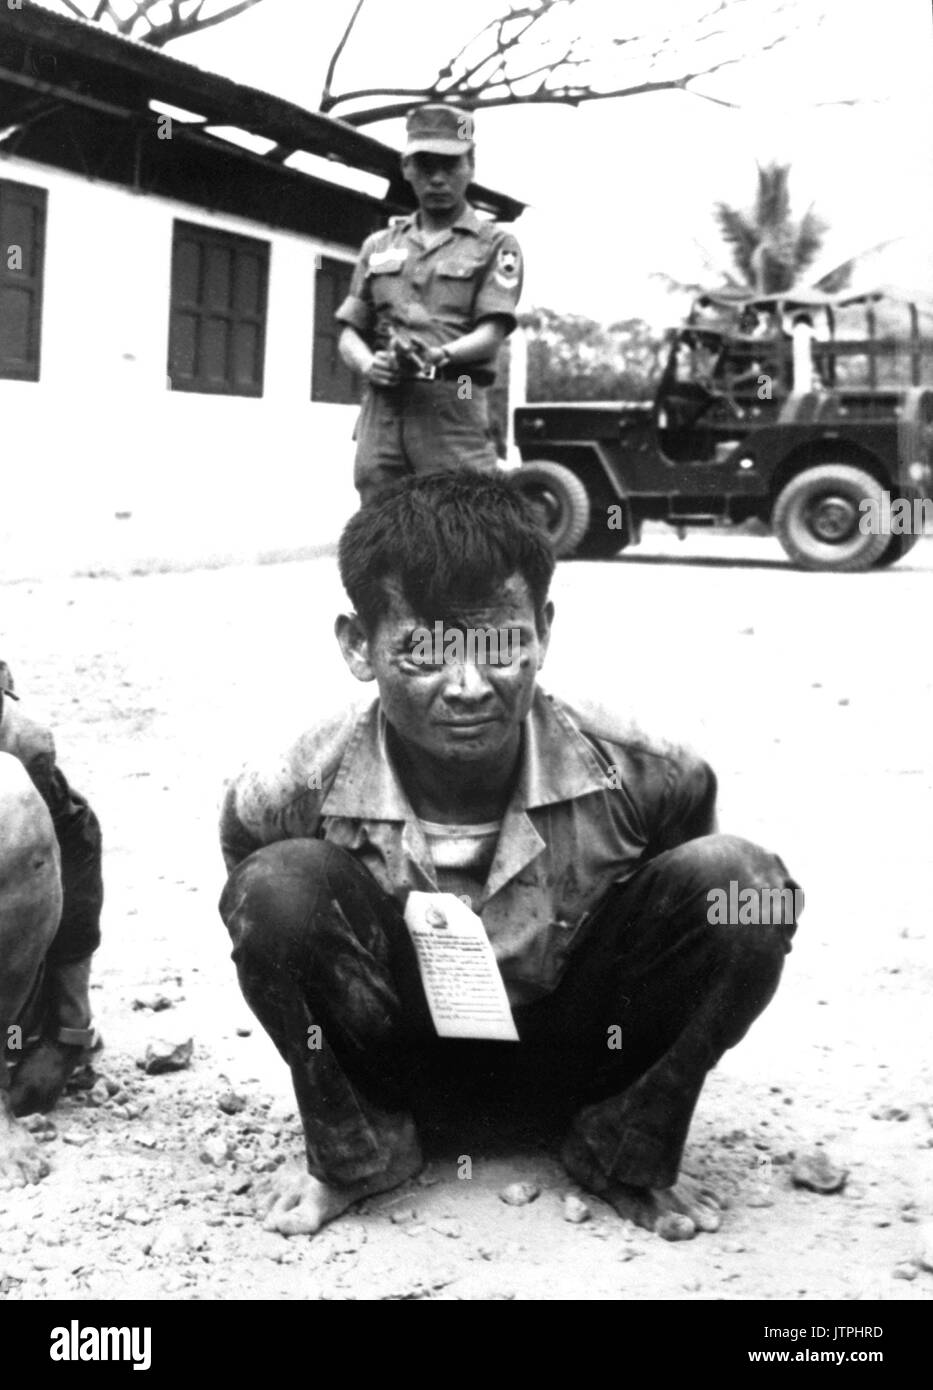 Youthful hard-core Viet Cong, heavily guarded, awaits interrogation following capture in the attacks on the capital city during the festive Tet holiday period.  1968.  (USIA) EXACT DATE SHOT UNKNOWN NARA FILE #:  306-MVP-21-1 WAR & CONFLICT BOOK #:  414 Stock Photo